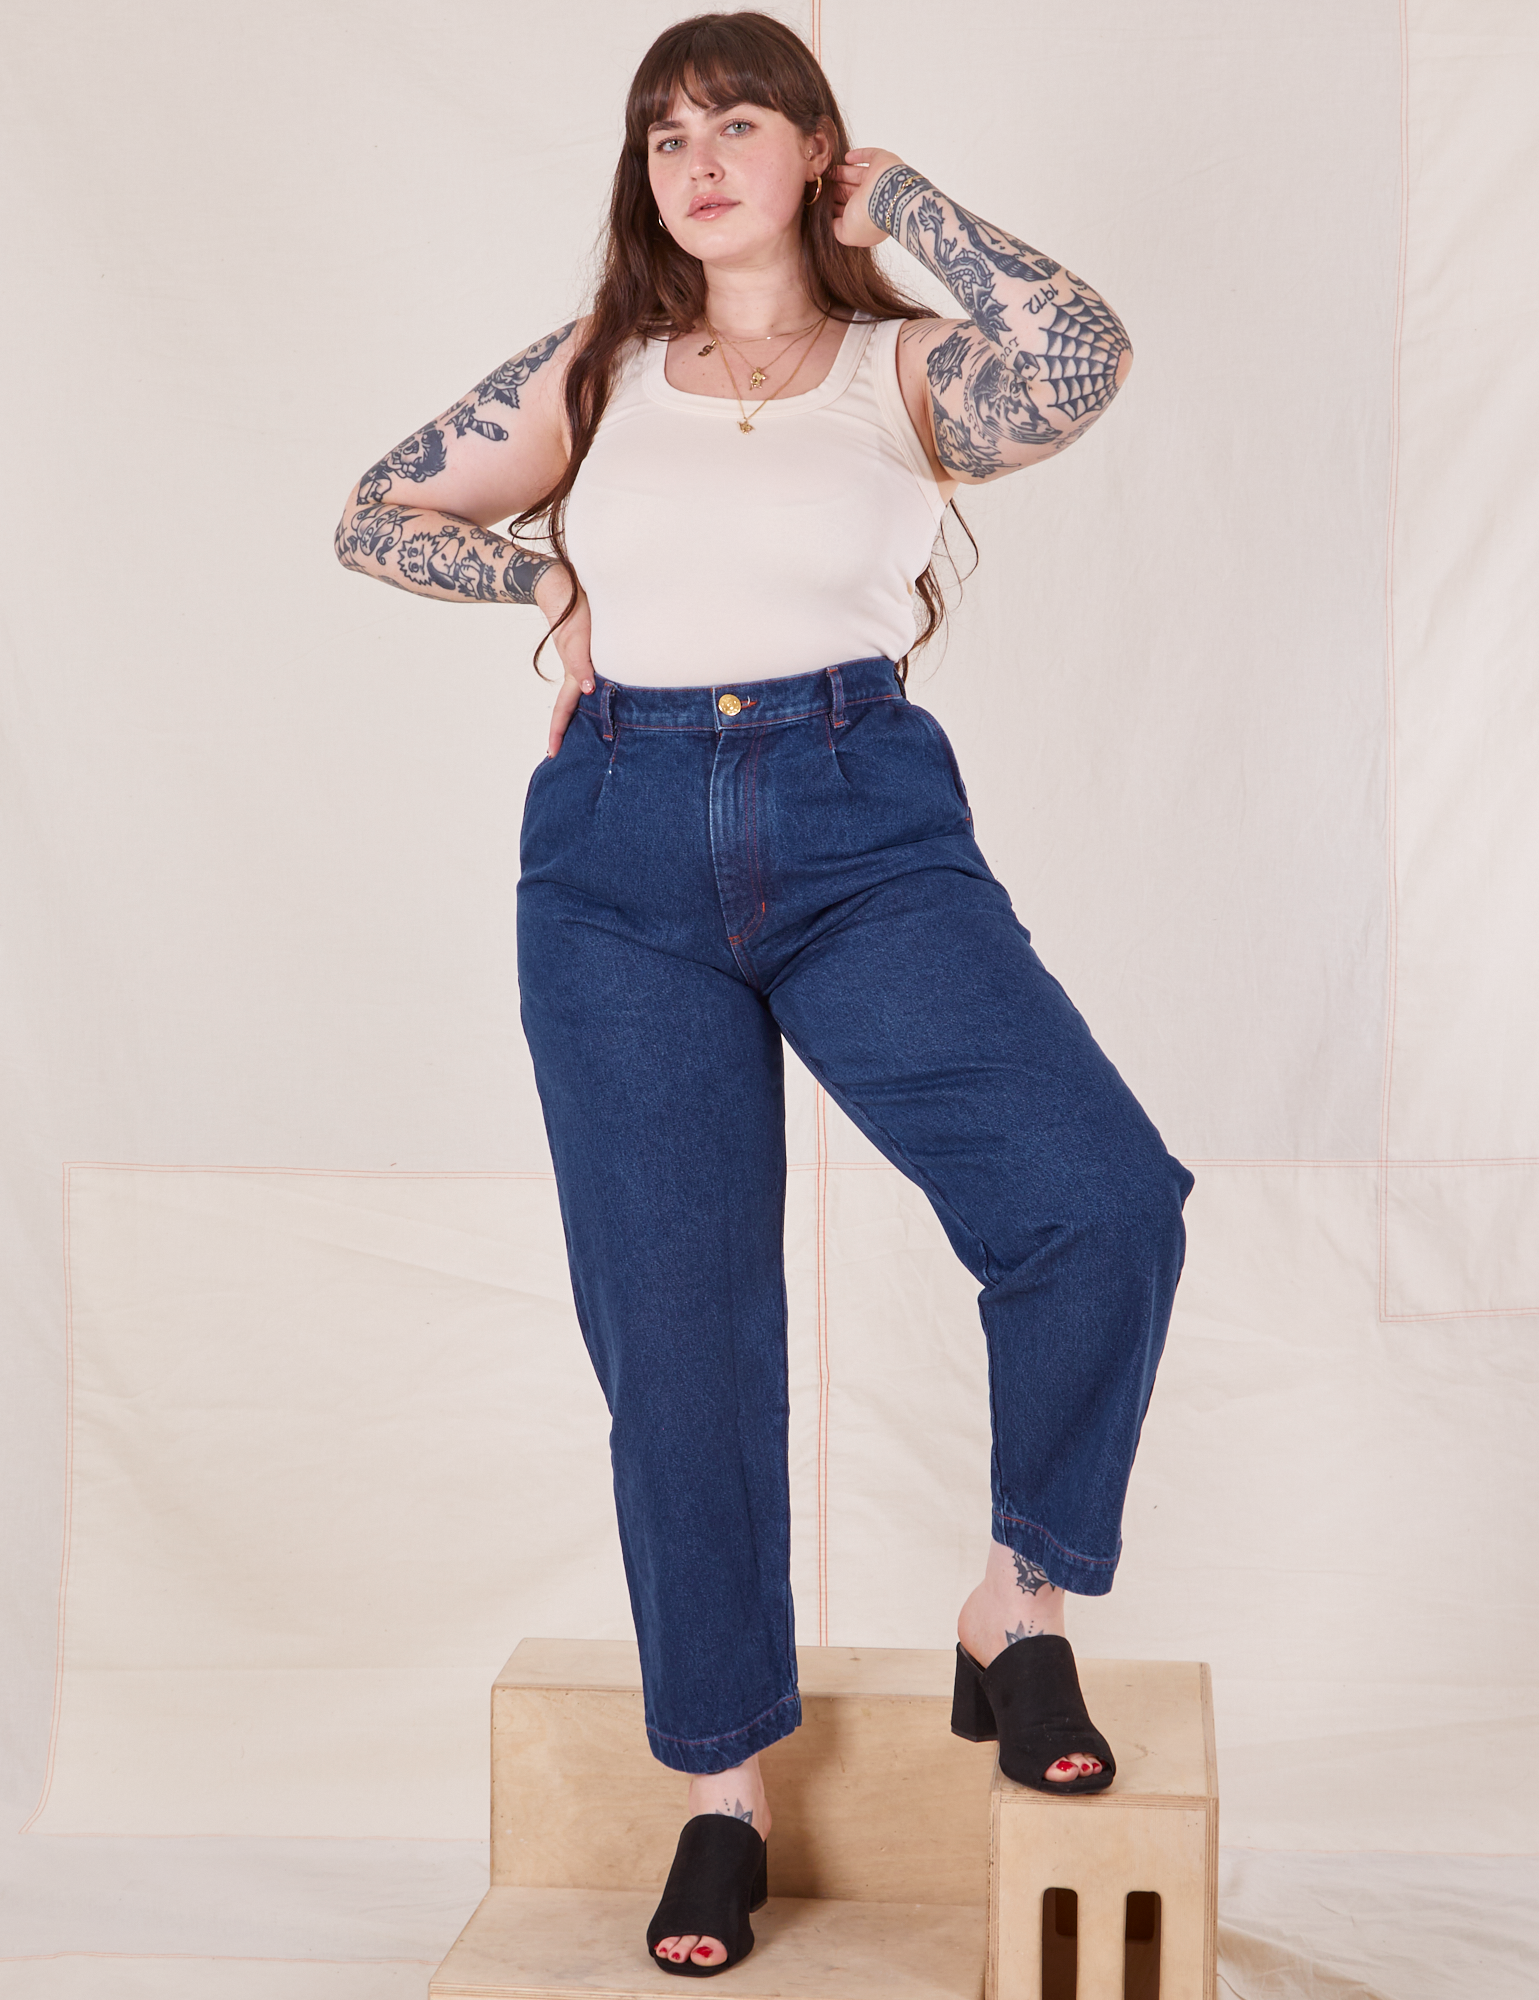 Sydney is 5&#39;9&quot; and wearing M Denim Trouser Jeans in Dark Wash paired with vintage off-white Tank Top